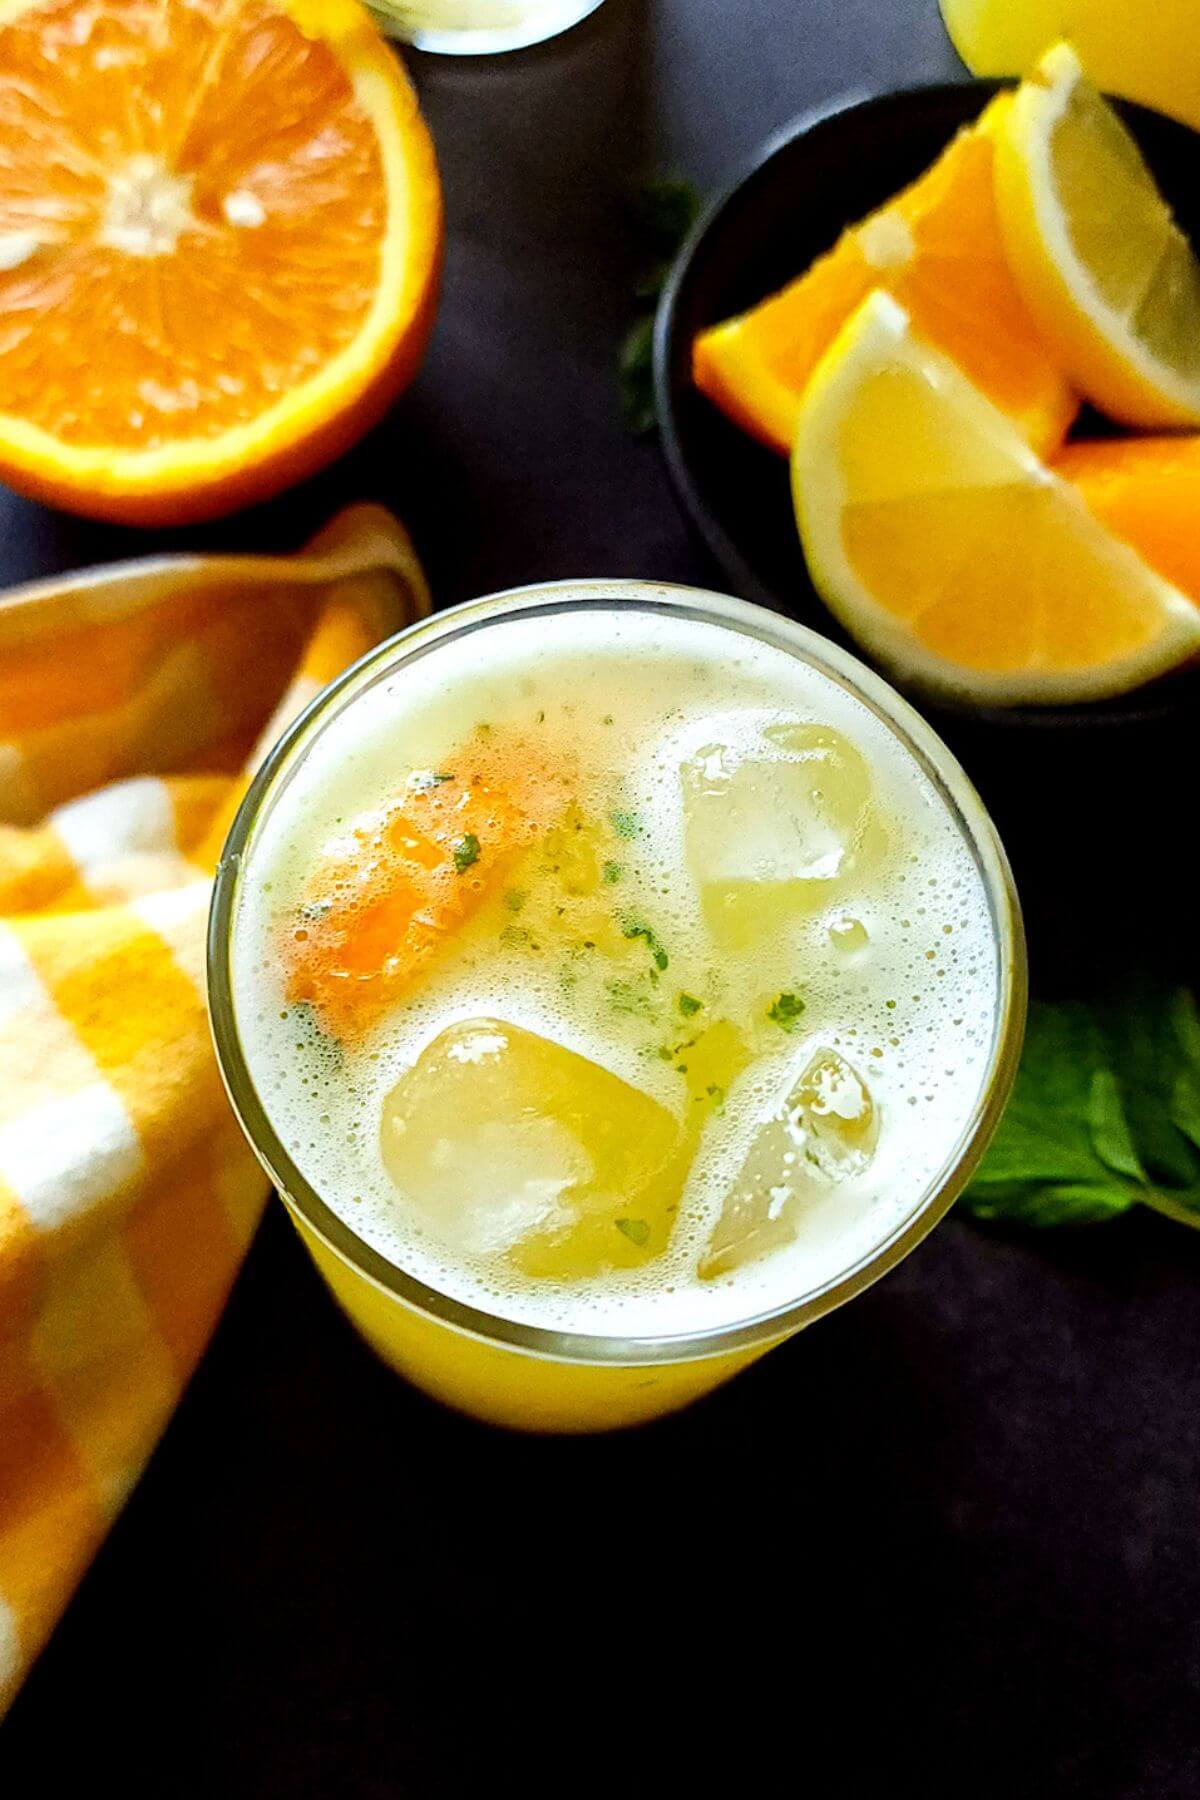 Orange lemonade in a glass with ice cubes.